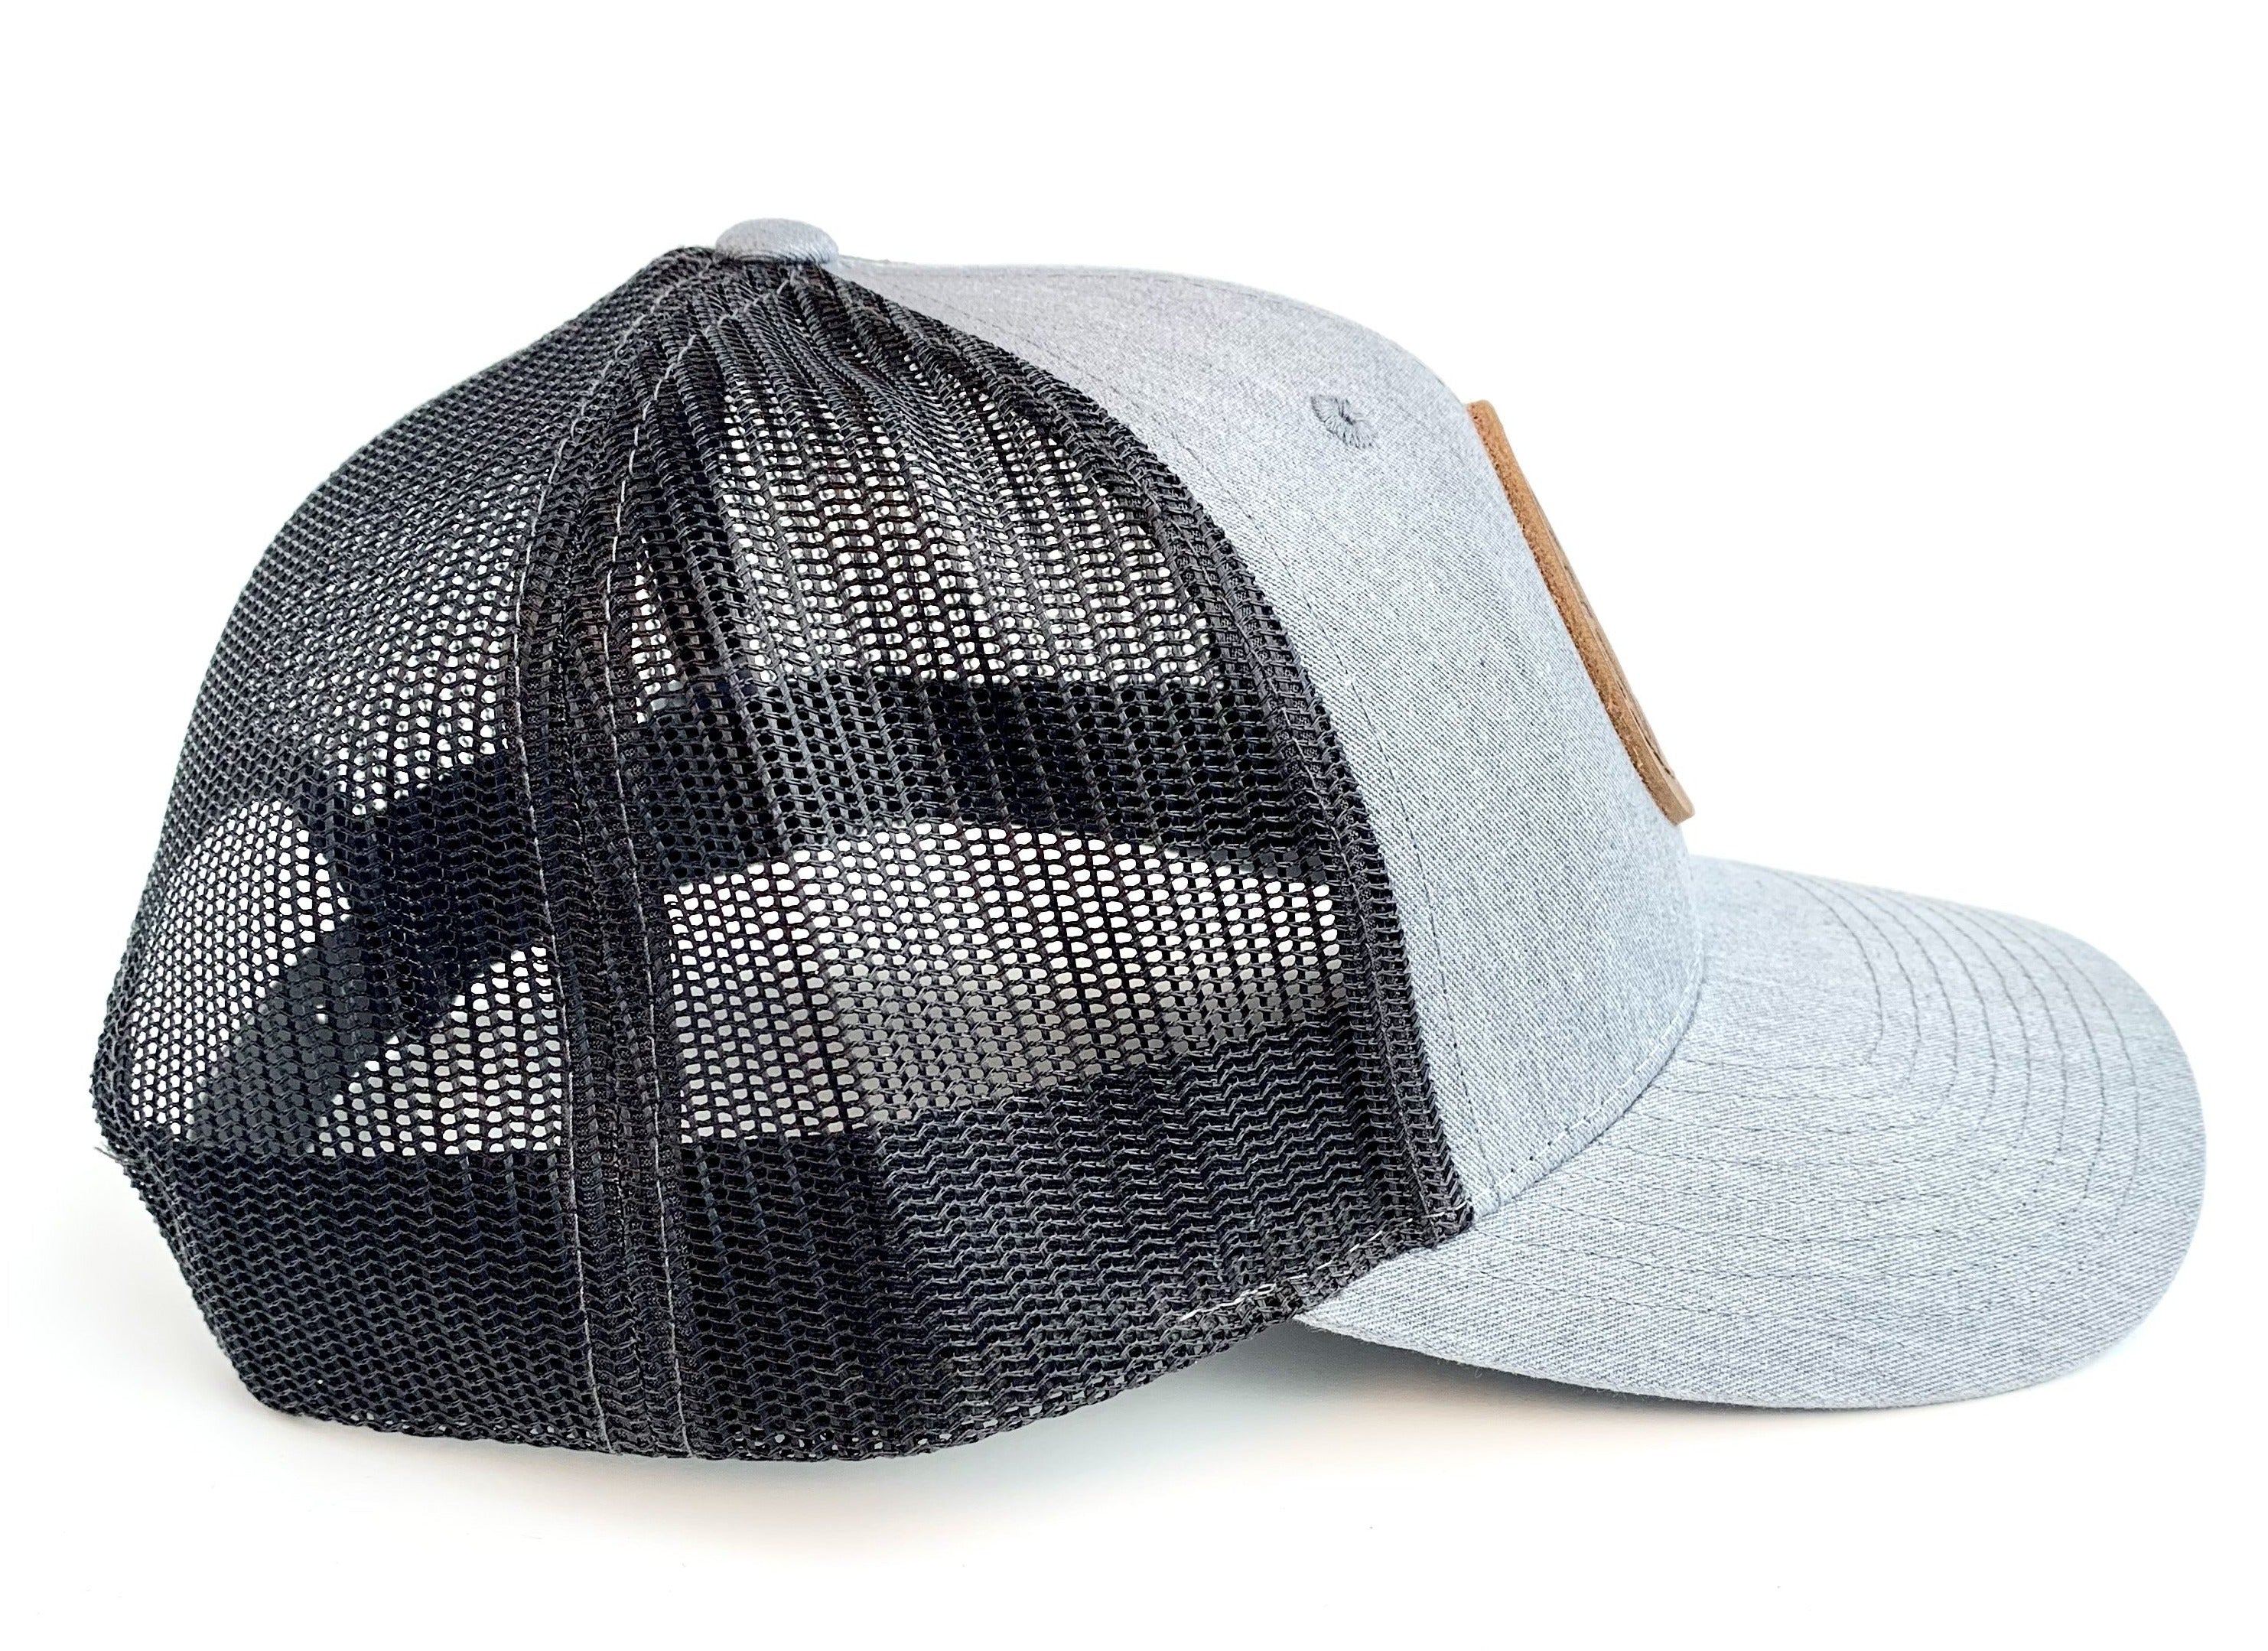 Eco Trucker Leather Patch Hat - Black & Gray